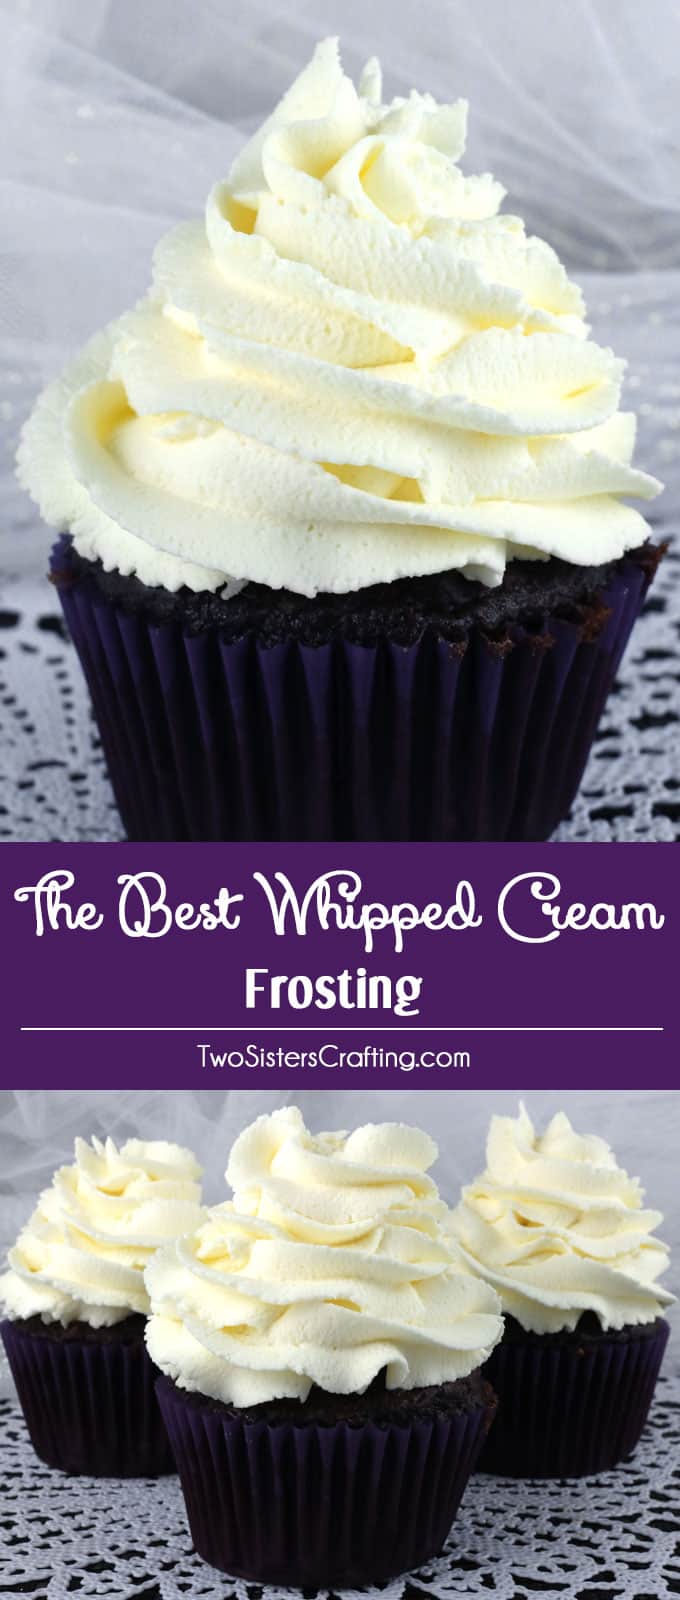 Delicious whipped cream frosting